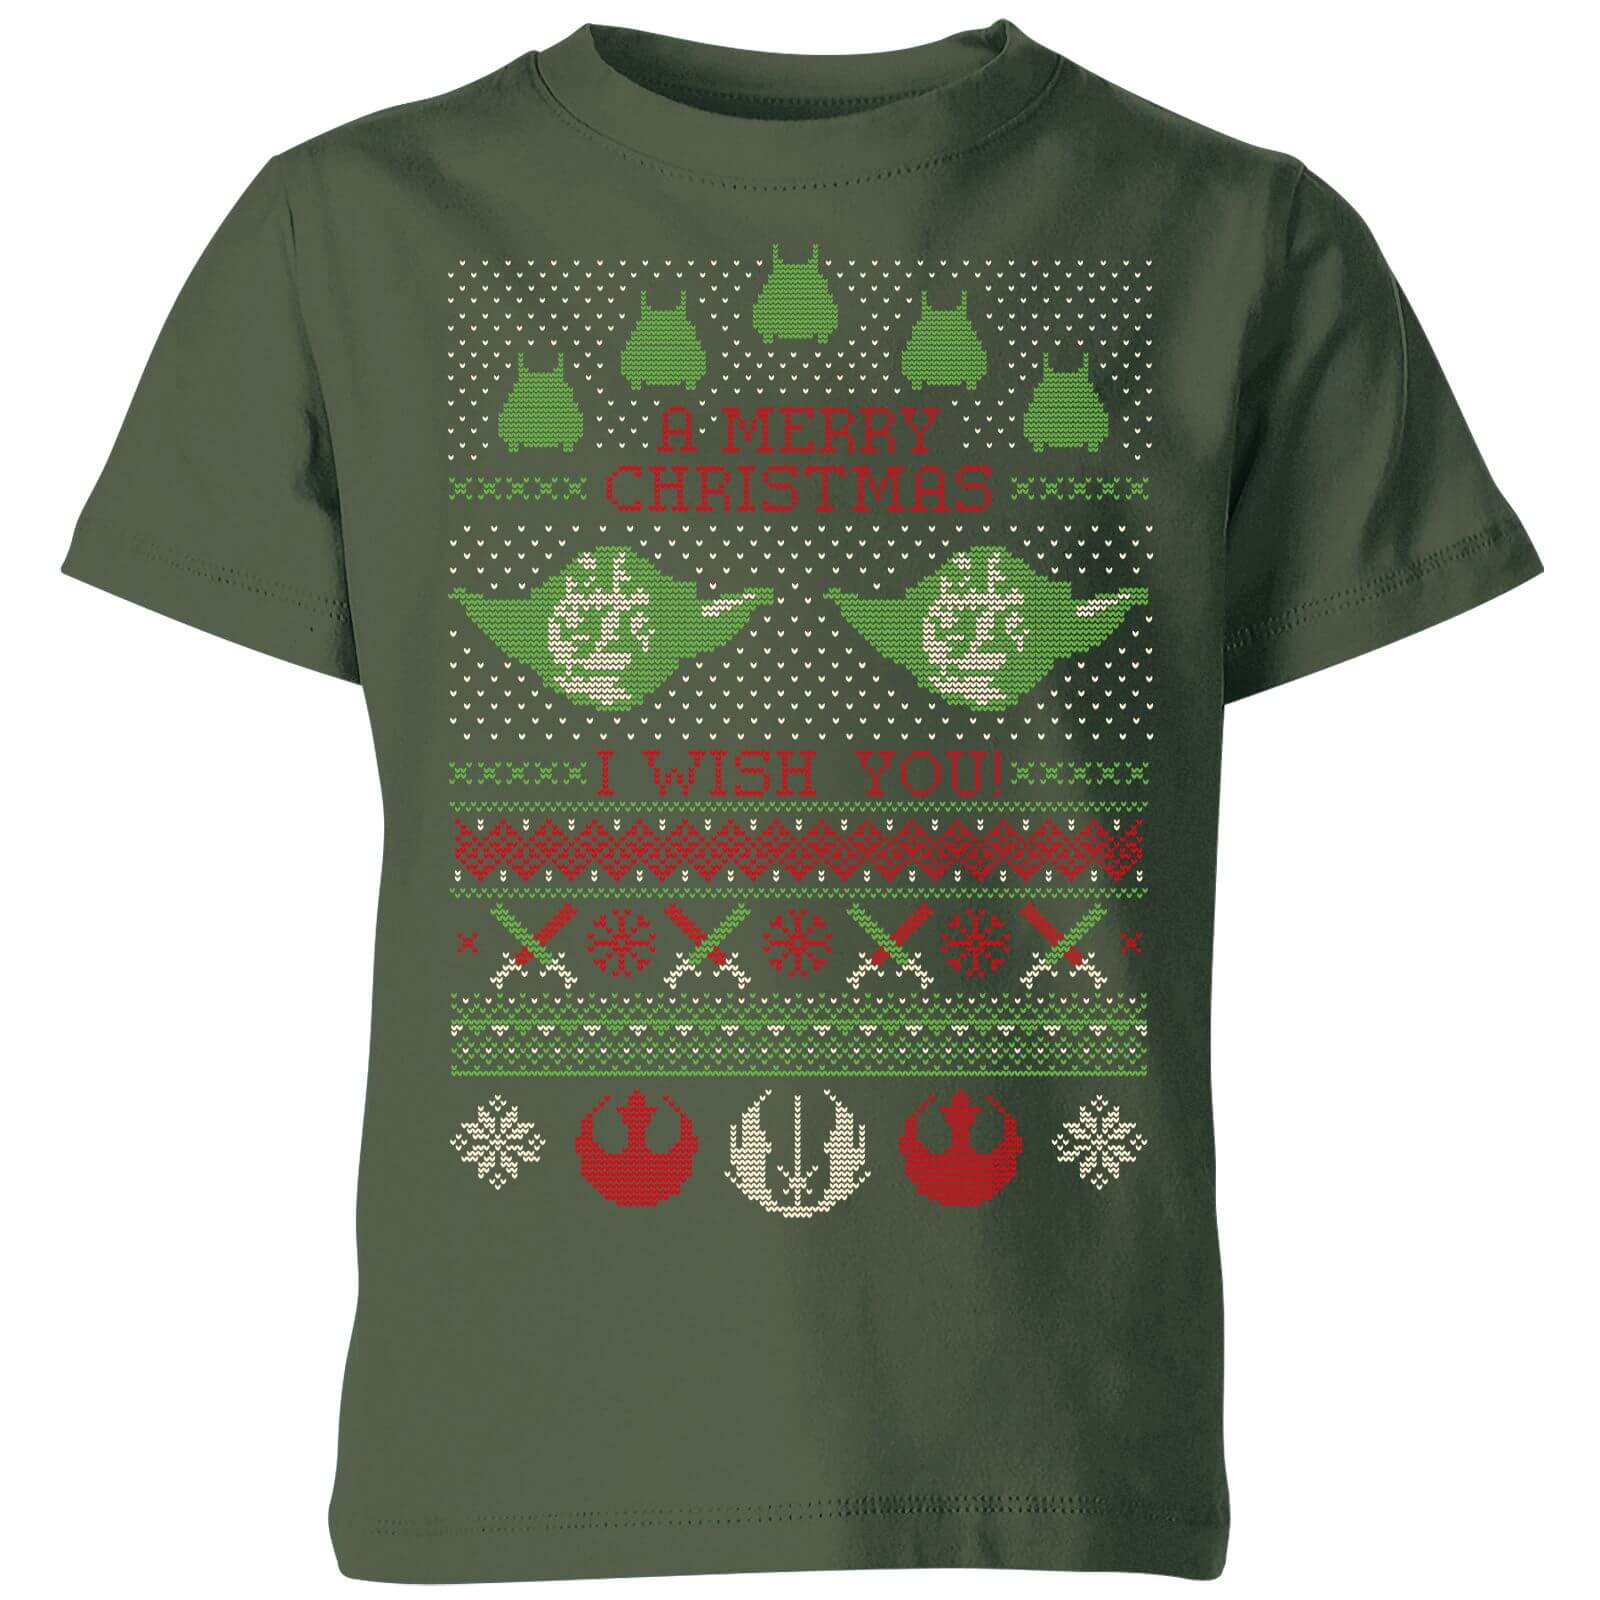 Star Wars Merry Christmas I Wish You Knit Kids Christmas T-Shirt - Forest Green - 3-4 Years